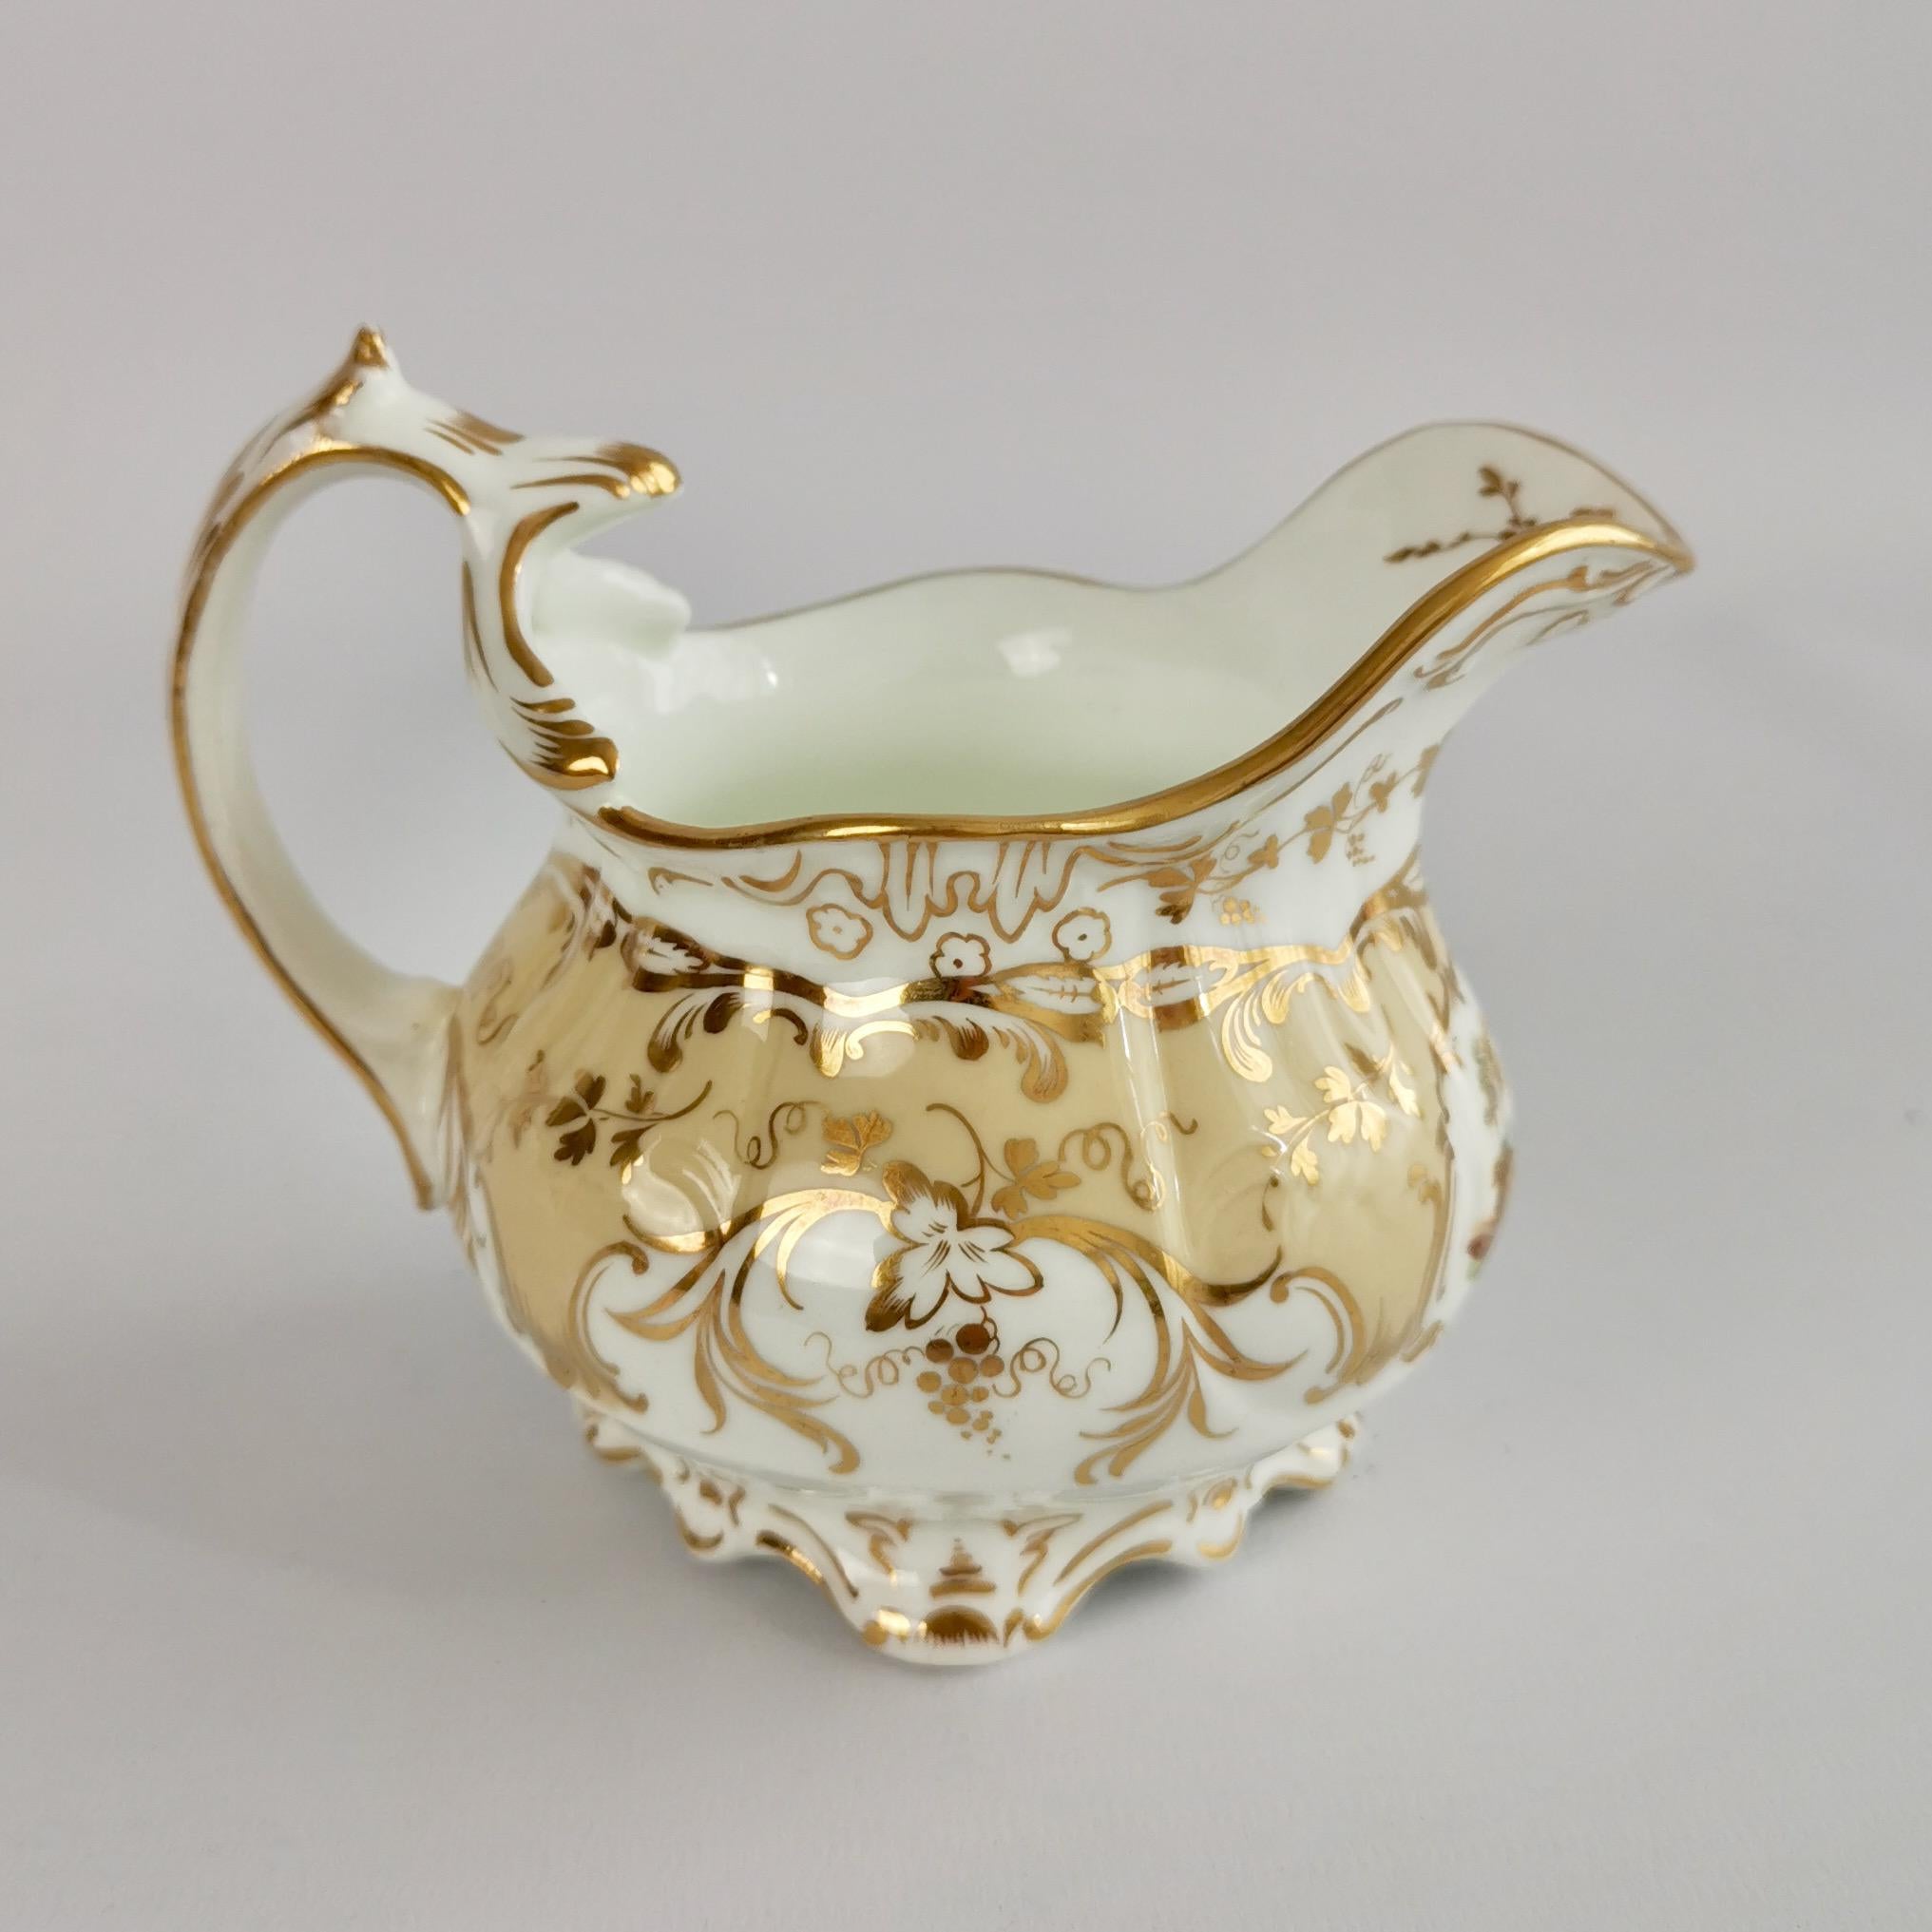 Hand-Painted Coalport Porcelain Creamer, Beige with Landscapes, Rococo Revival, ca 1840